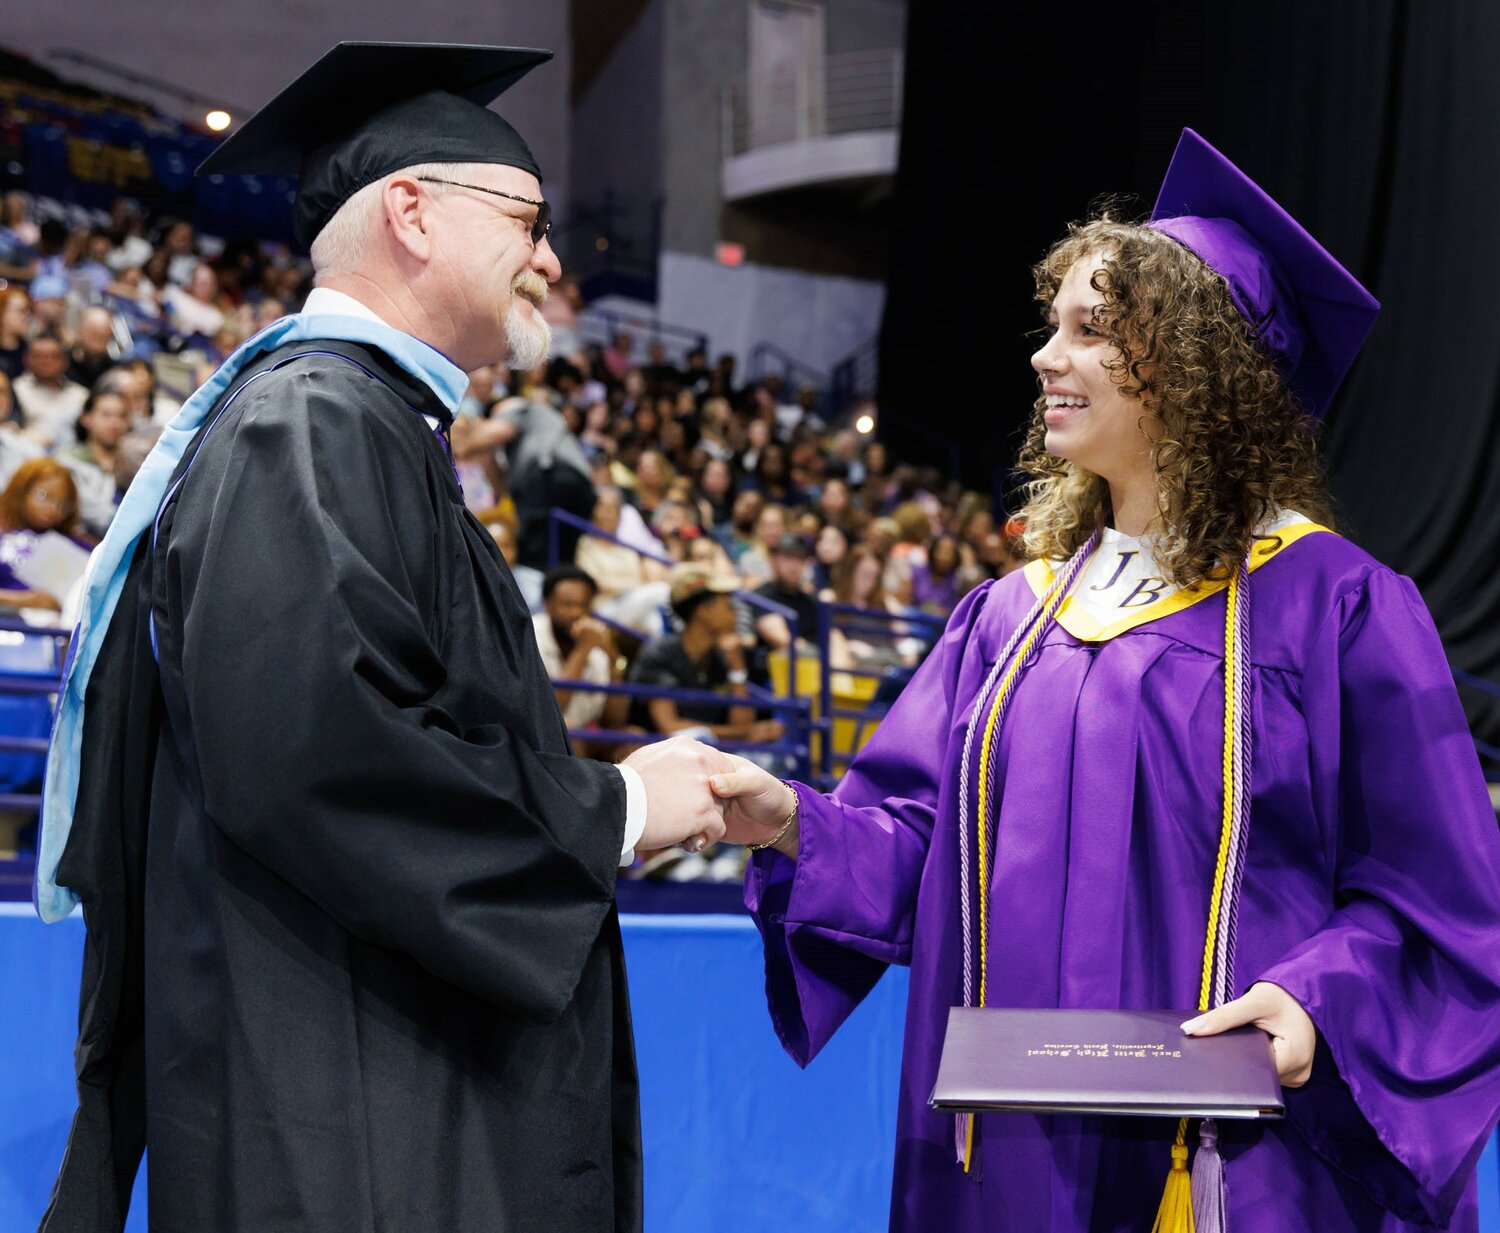 Jack Britt High School held its 2023 commencement Wednesday at the Crown Coliseum.